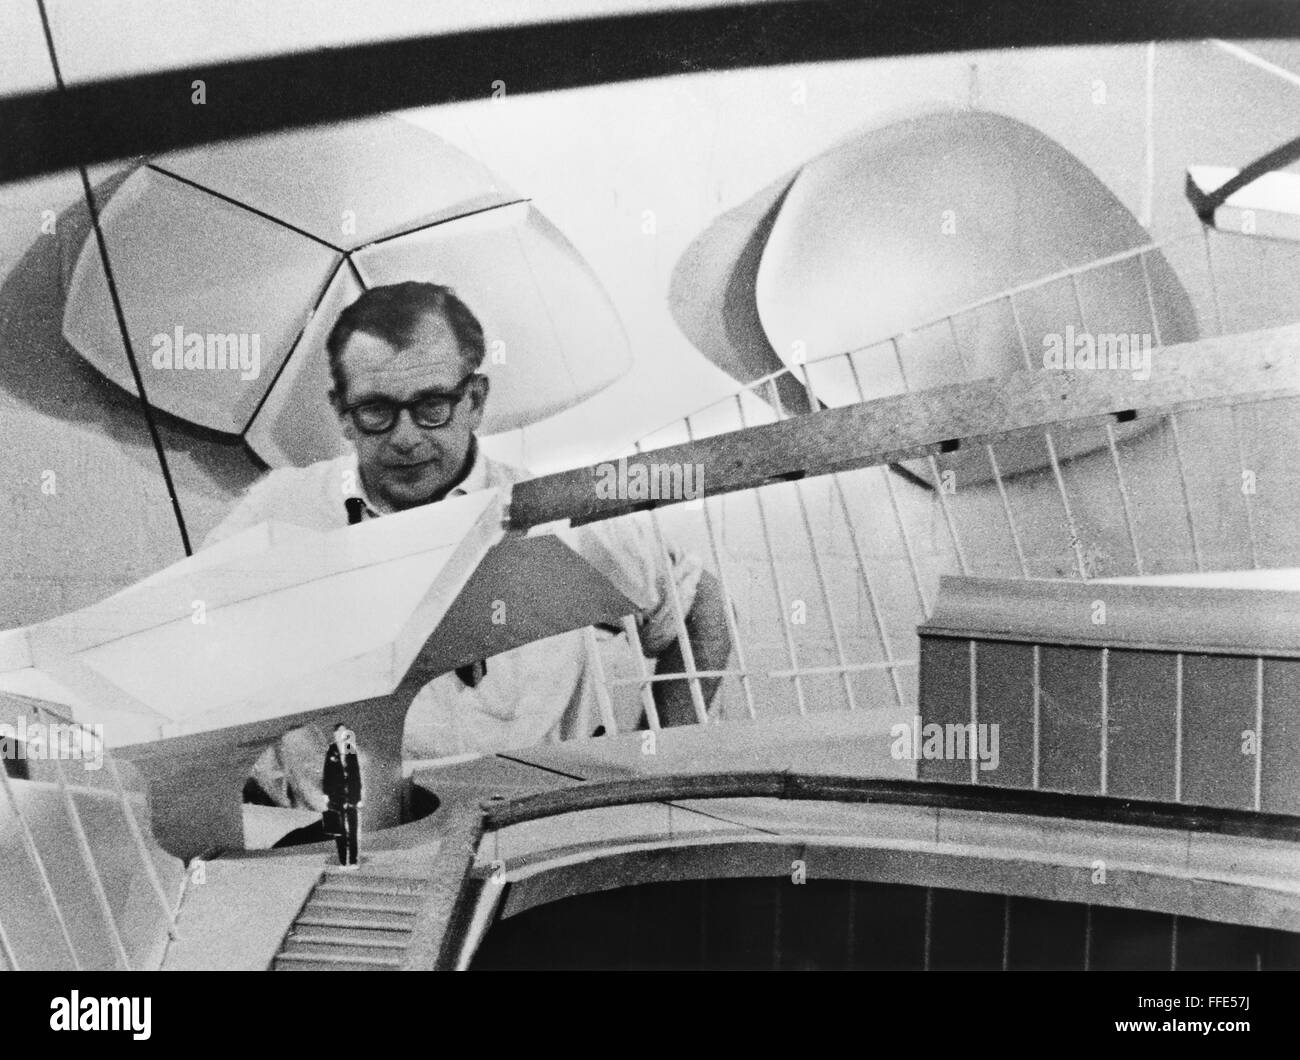 EERO SAARINEN (1910-1961). /nFinnish architect. With a scale model of the TWA Terminal at Kennedy Airport, New York. The terminal was completed in 1962, after Saarinen's death. Stock Photo